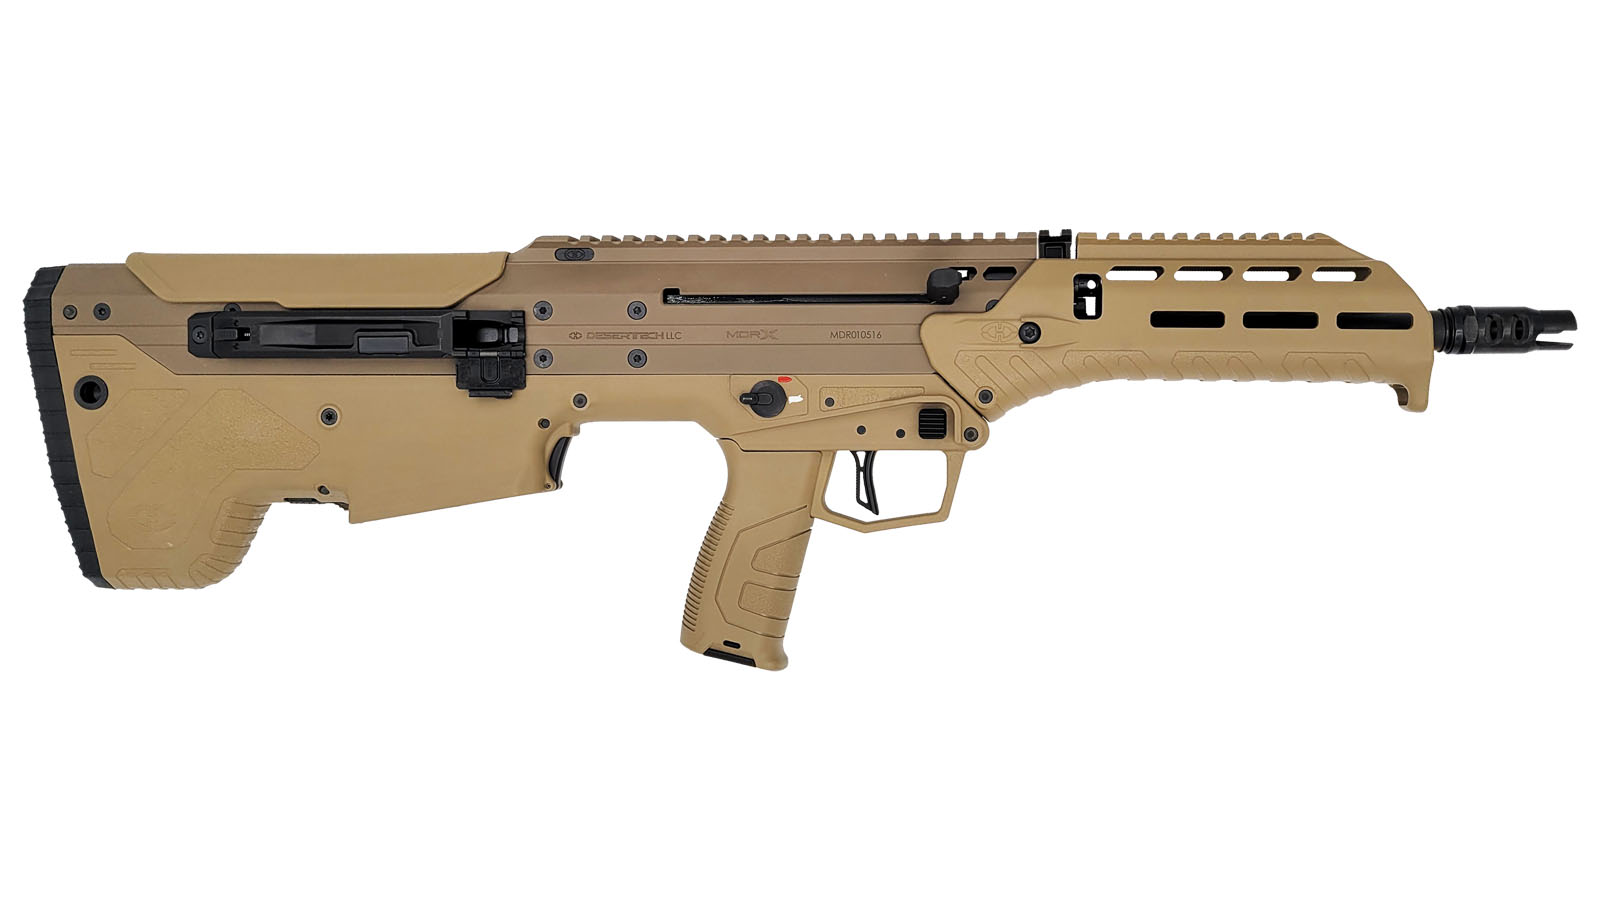 MDRx Rifle, 762NATO 308Win 16" 20rd Forward-Ejection FDE